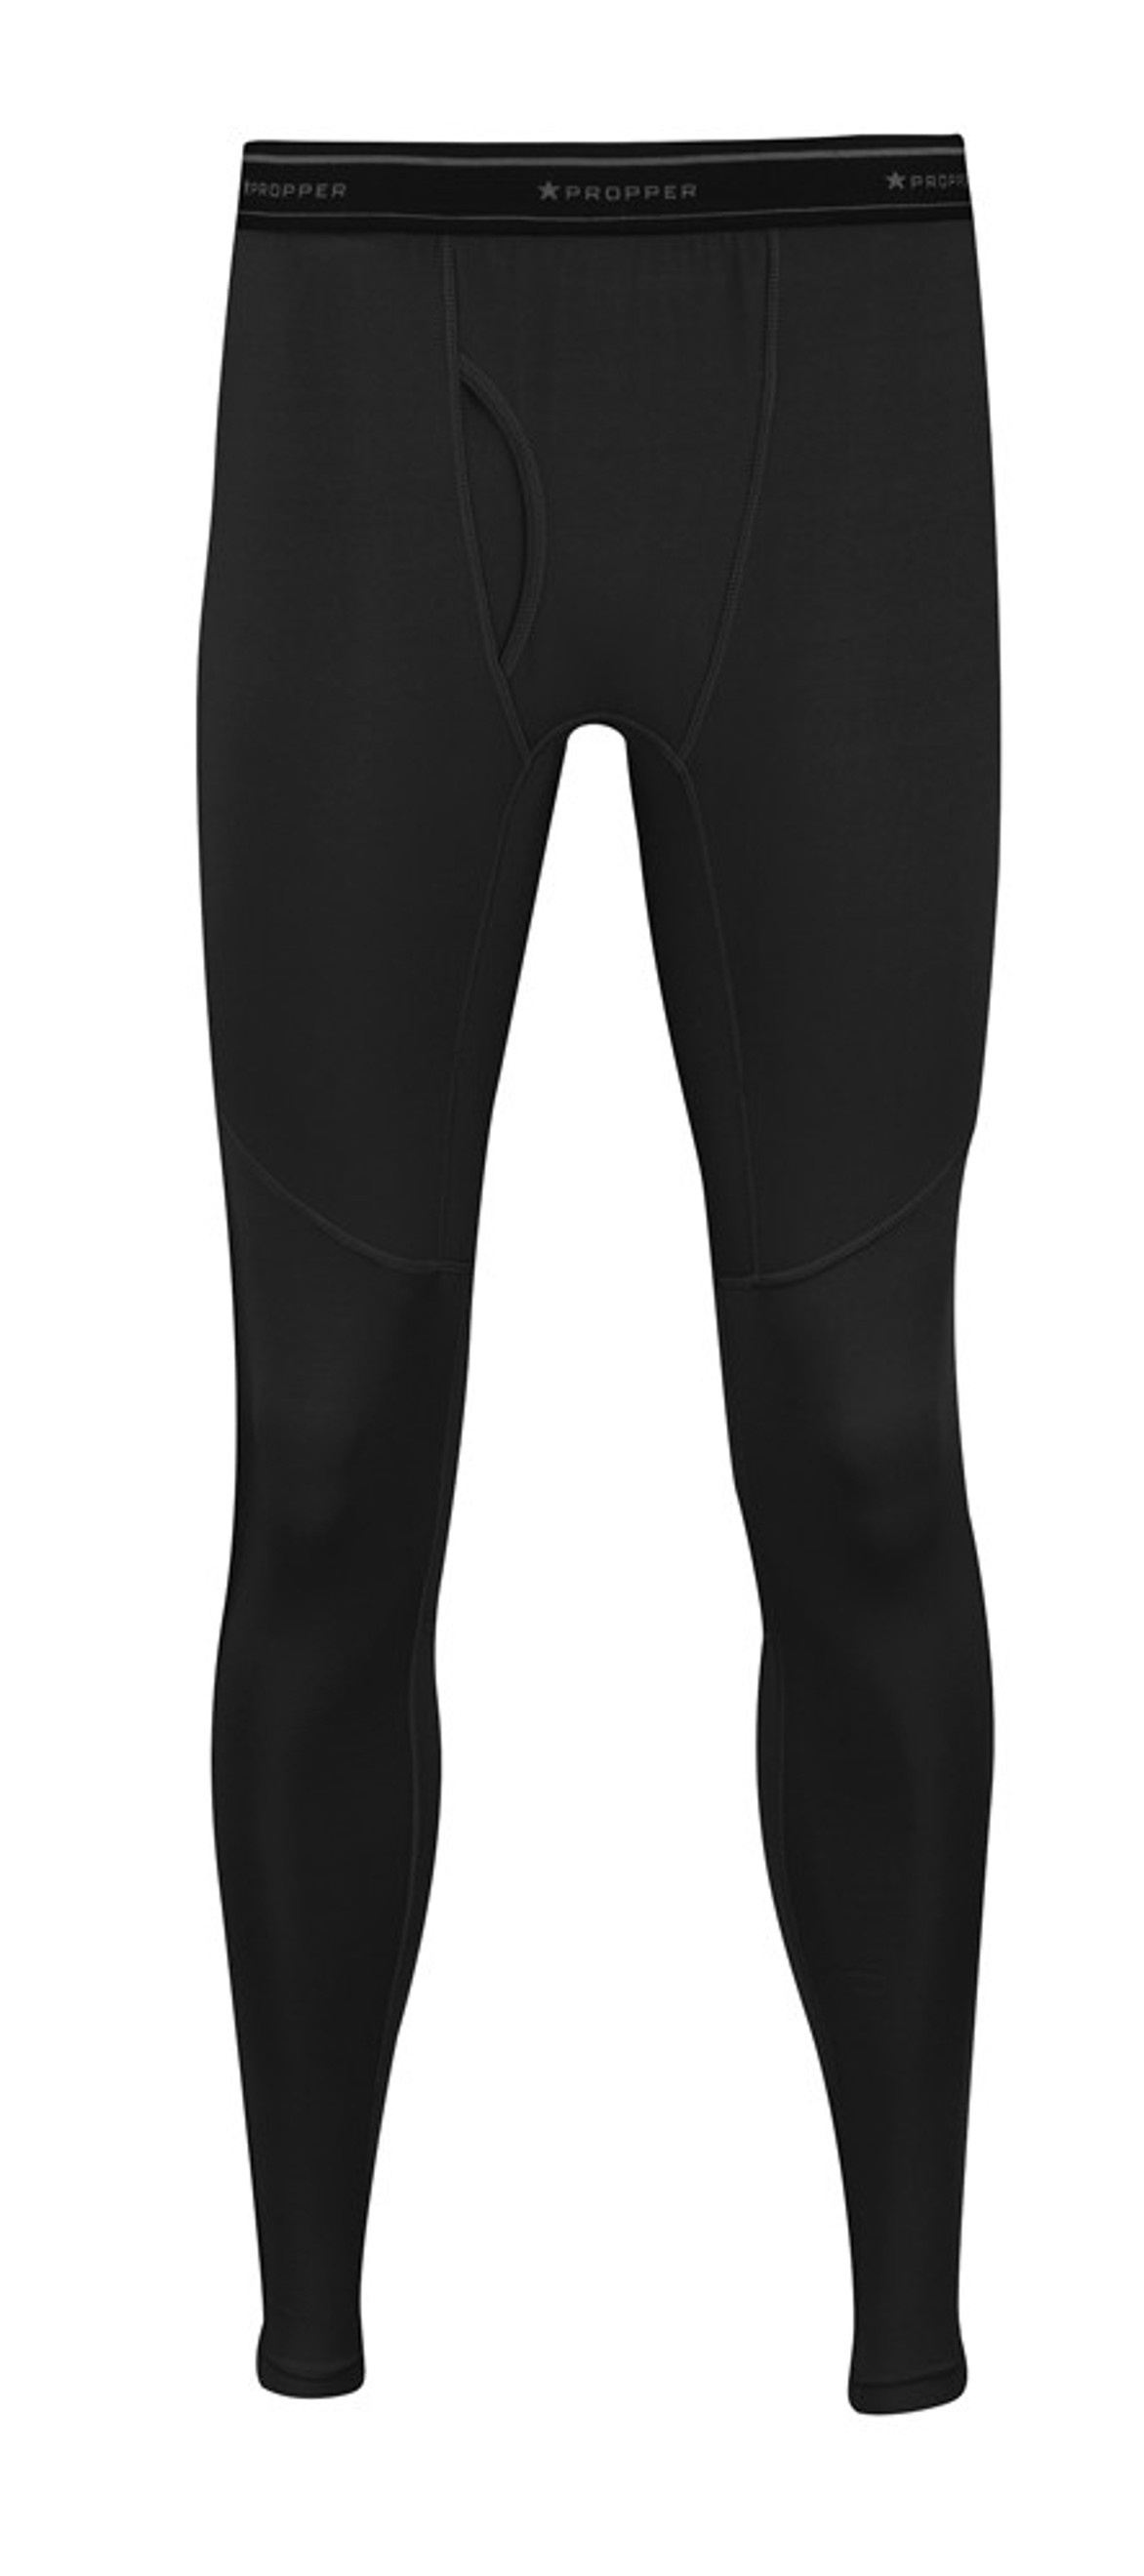 Propper Midweight Base Layer Bottom